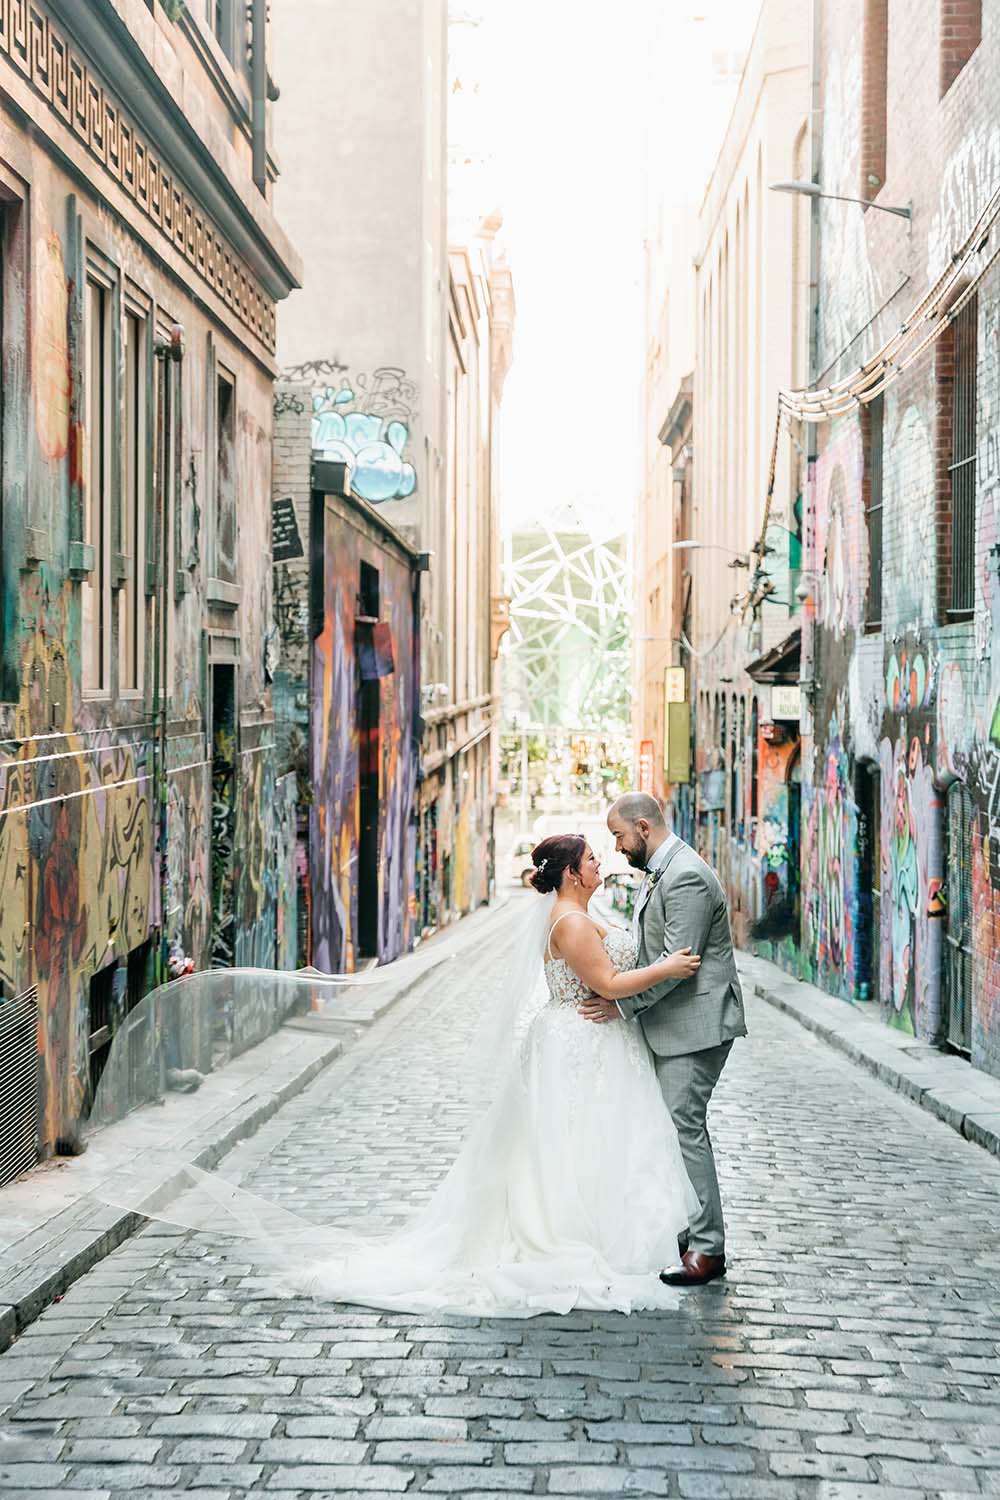 Destination Wedding Photography - Bride and Groom Embrace in Alley